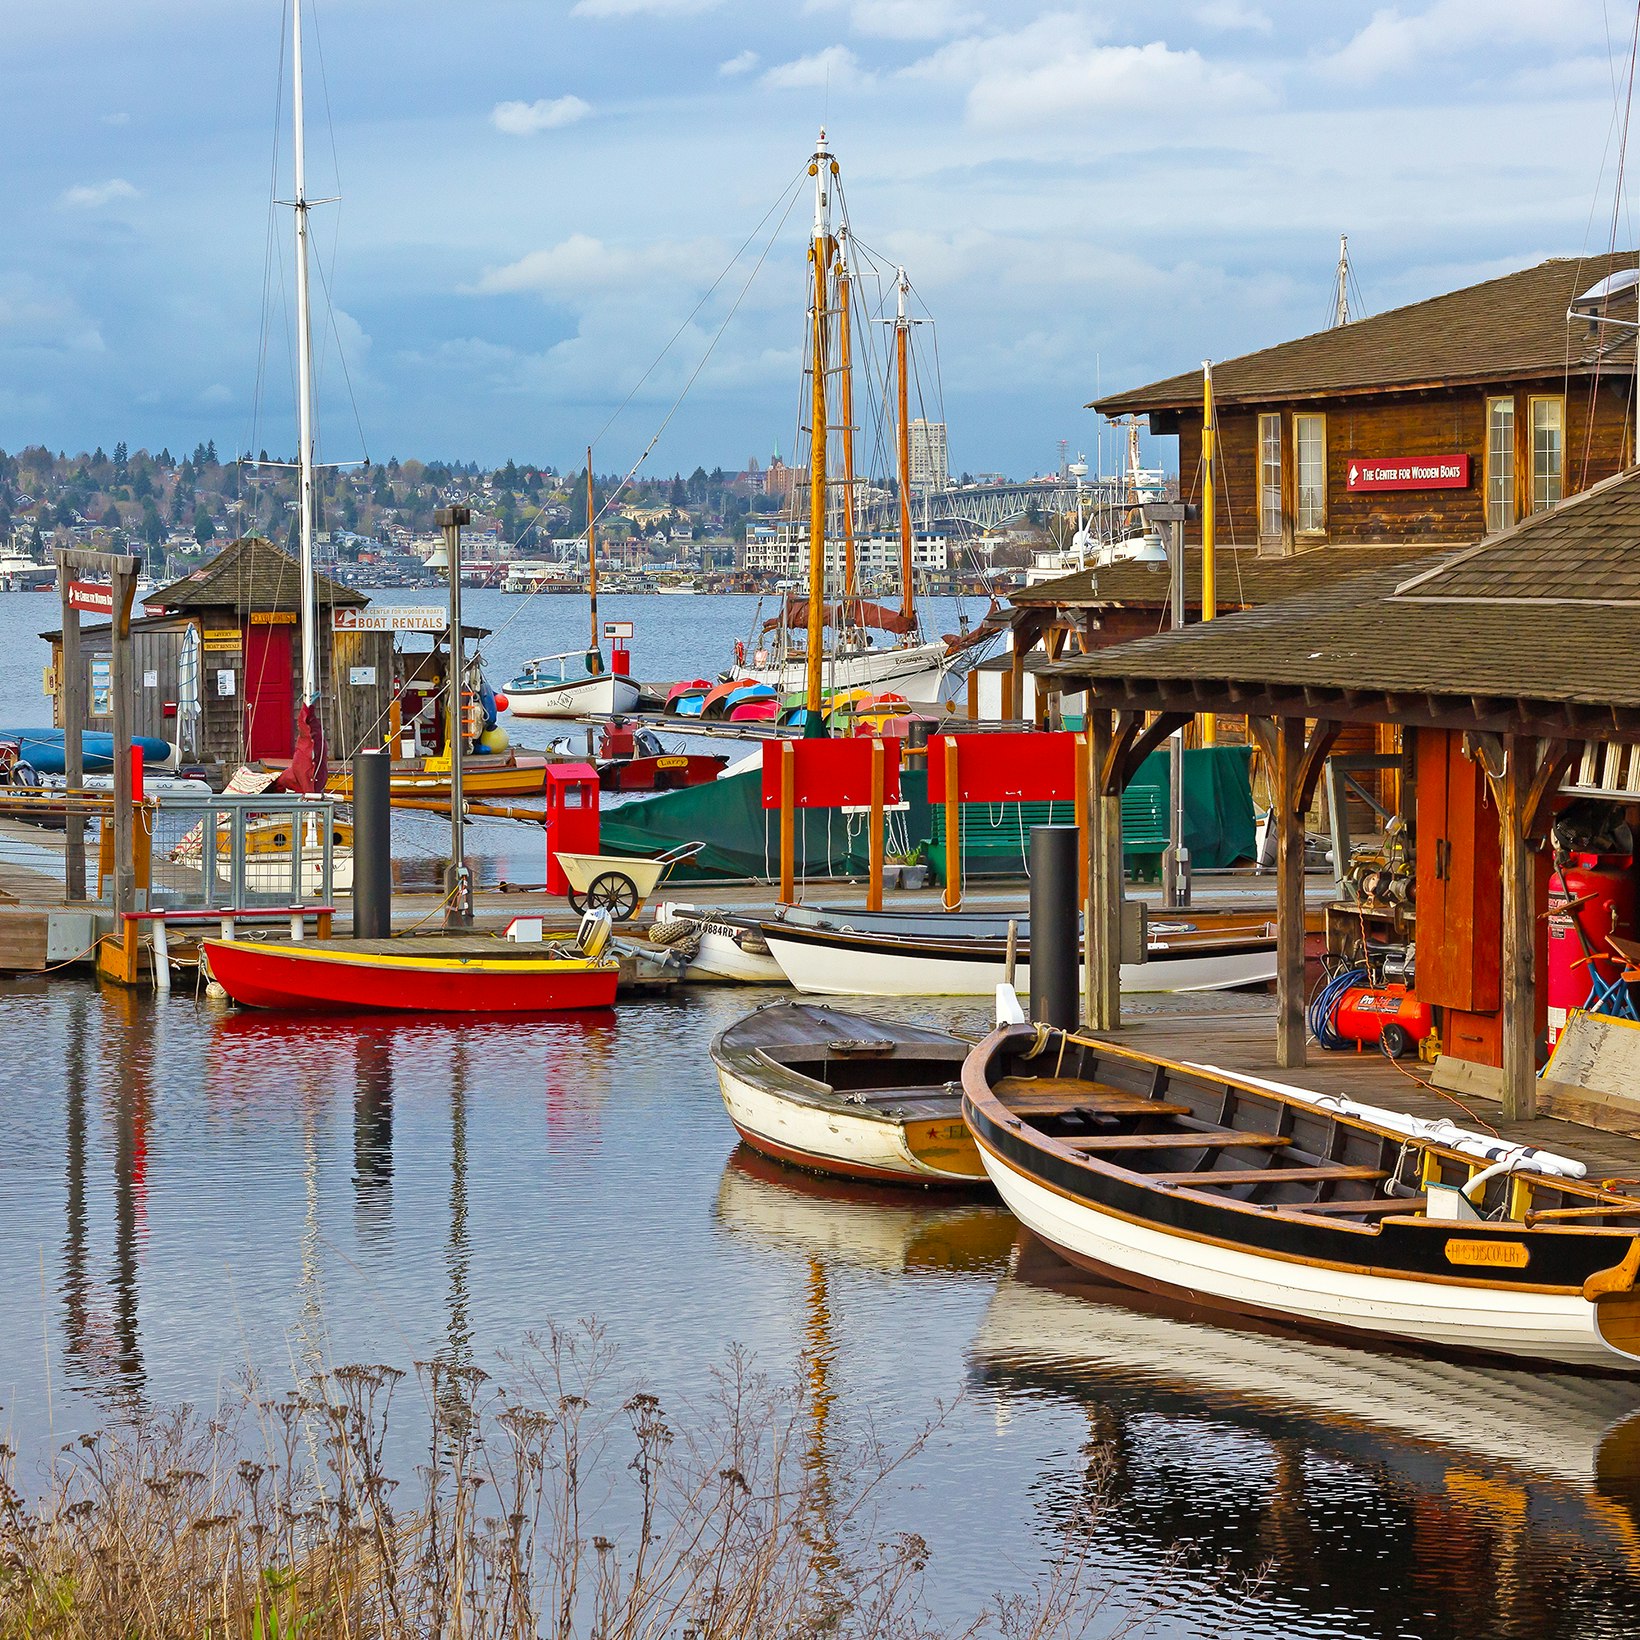 SEATTLE, USA - MARCH 22, 2016: Center for Wooden Boats on Lake Union on March 22, 2016 in Seattle, WA, USA. Various boats are available for rent to paddle on the Lake Union.; Shutterstock ID 430690528; Your name (First / Last): Alexander Howard; GL account no.: 65050; Netsuite department name: Online Editorial; Full Product or Project name including edition: Western USA neighborhood POI highlights